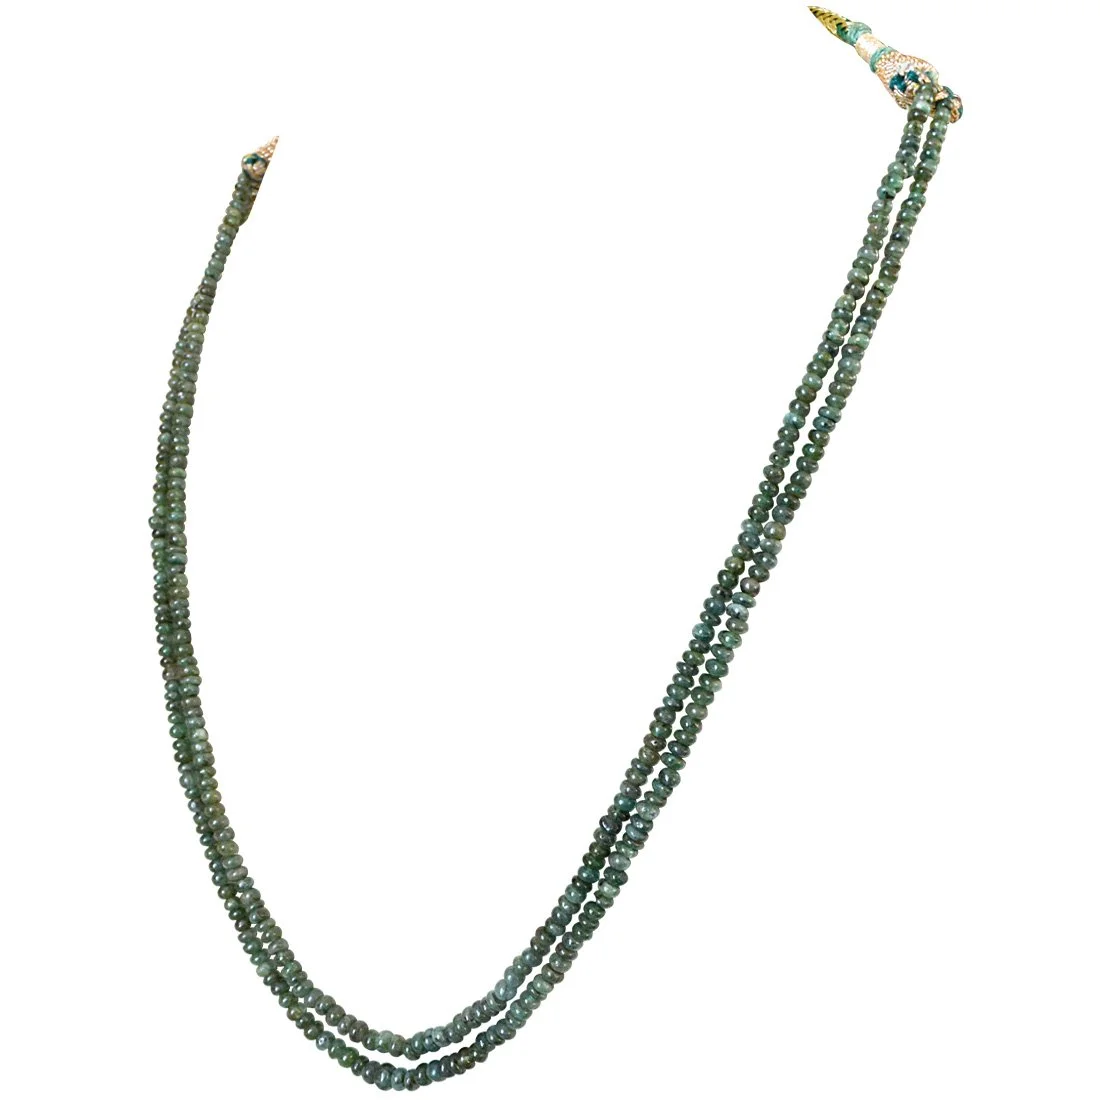 Two Line 93cts REAL Natural Green Emerald Beads Necklace for Women (93cts EMR Neck)